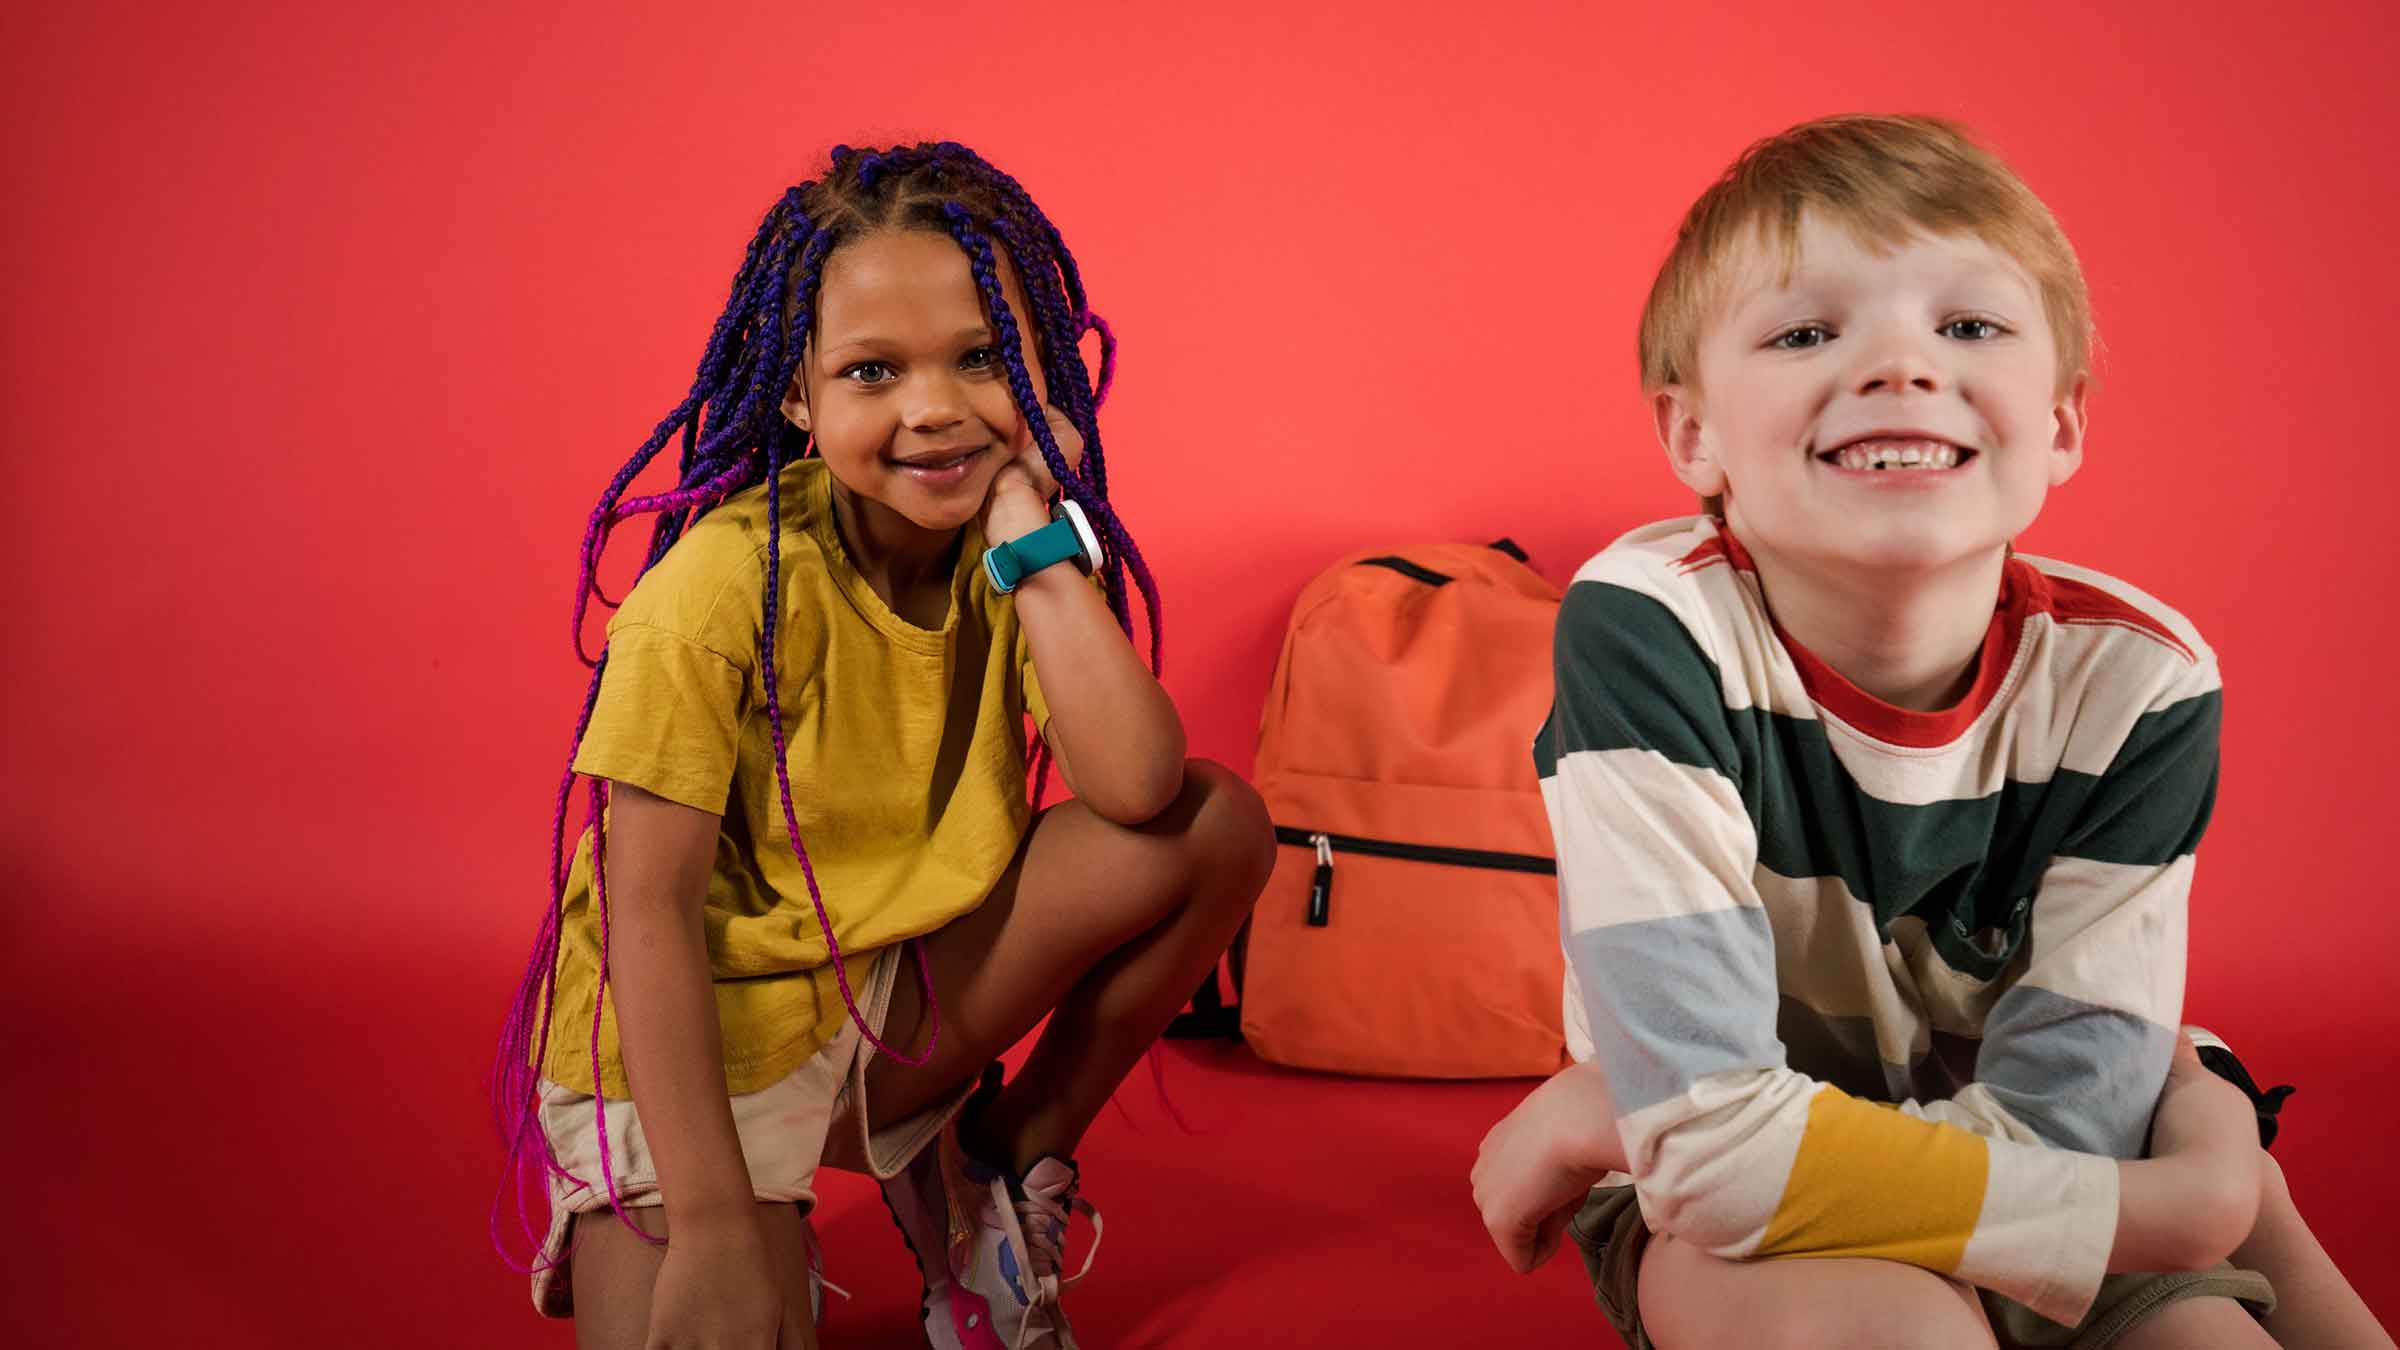 Two young children smile at the camera with a backpack sitting behind them